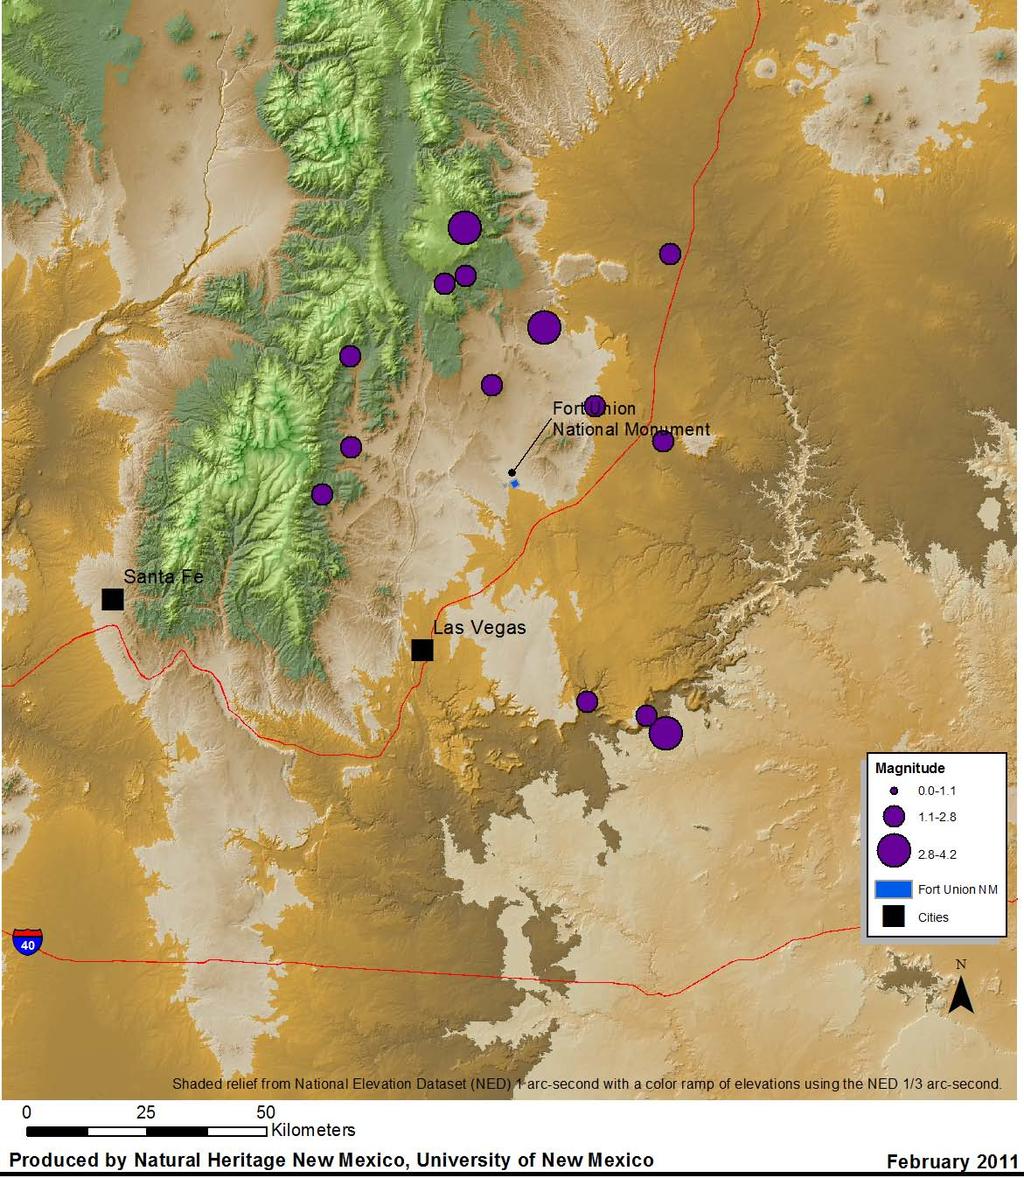 Figure 3-3. Earthquakes detected within 0.